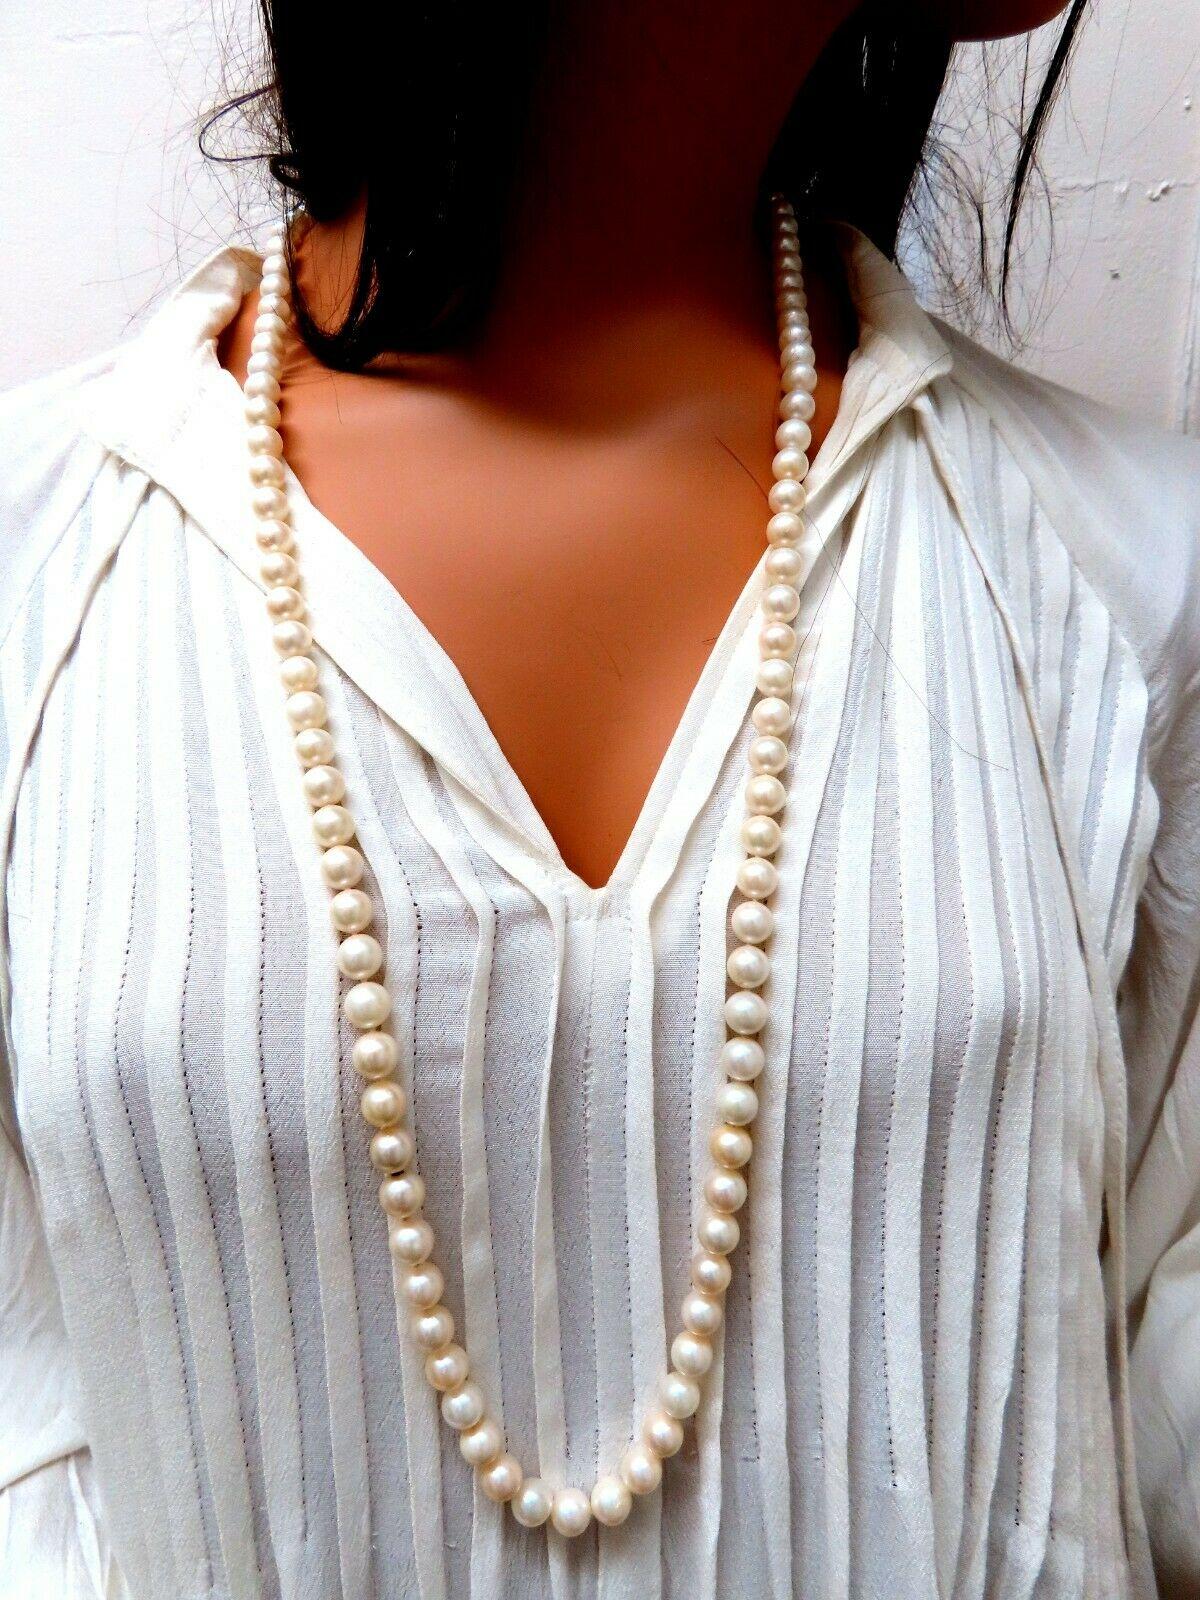 GIA Akoya's

The Natural Pinctada Fucata

(Akoya Pearl Oyster) Report: 2215976003 Saltwater White & slight, slight pink and green overtone

8.45 - 8.90mm

93 grams total weight

35 Inches

101 Pearls

Can be worn as double wrap

$7000 Appraisal